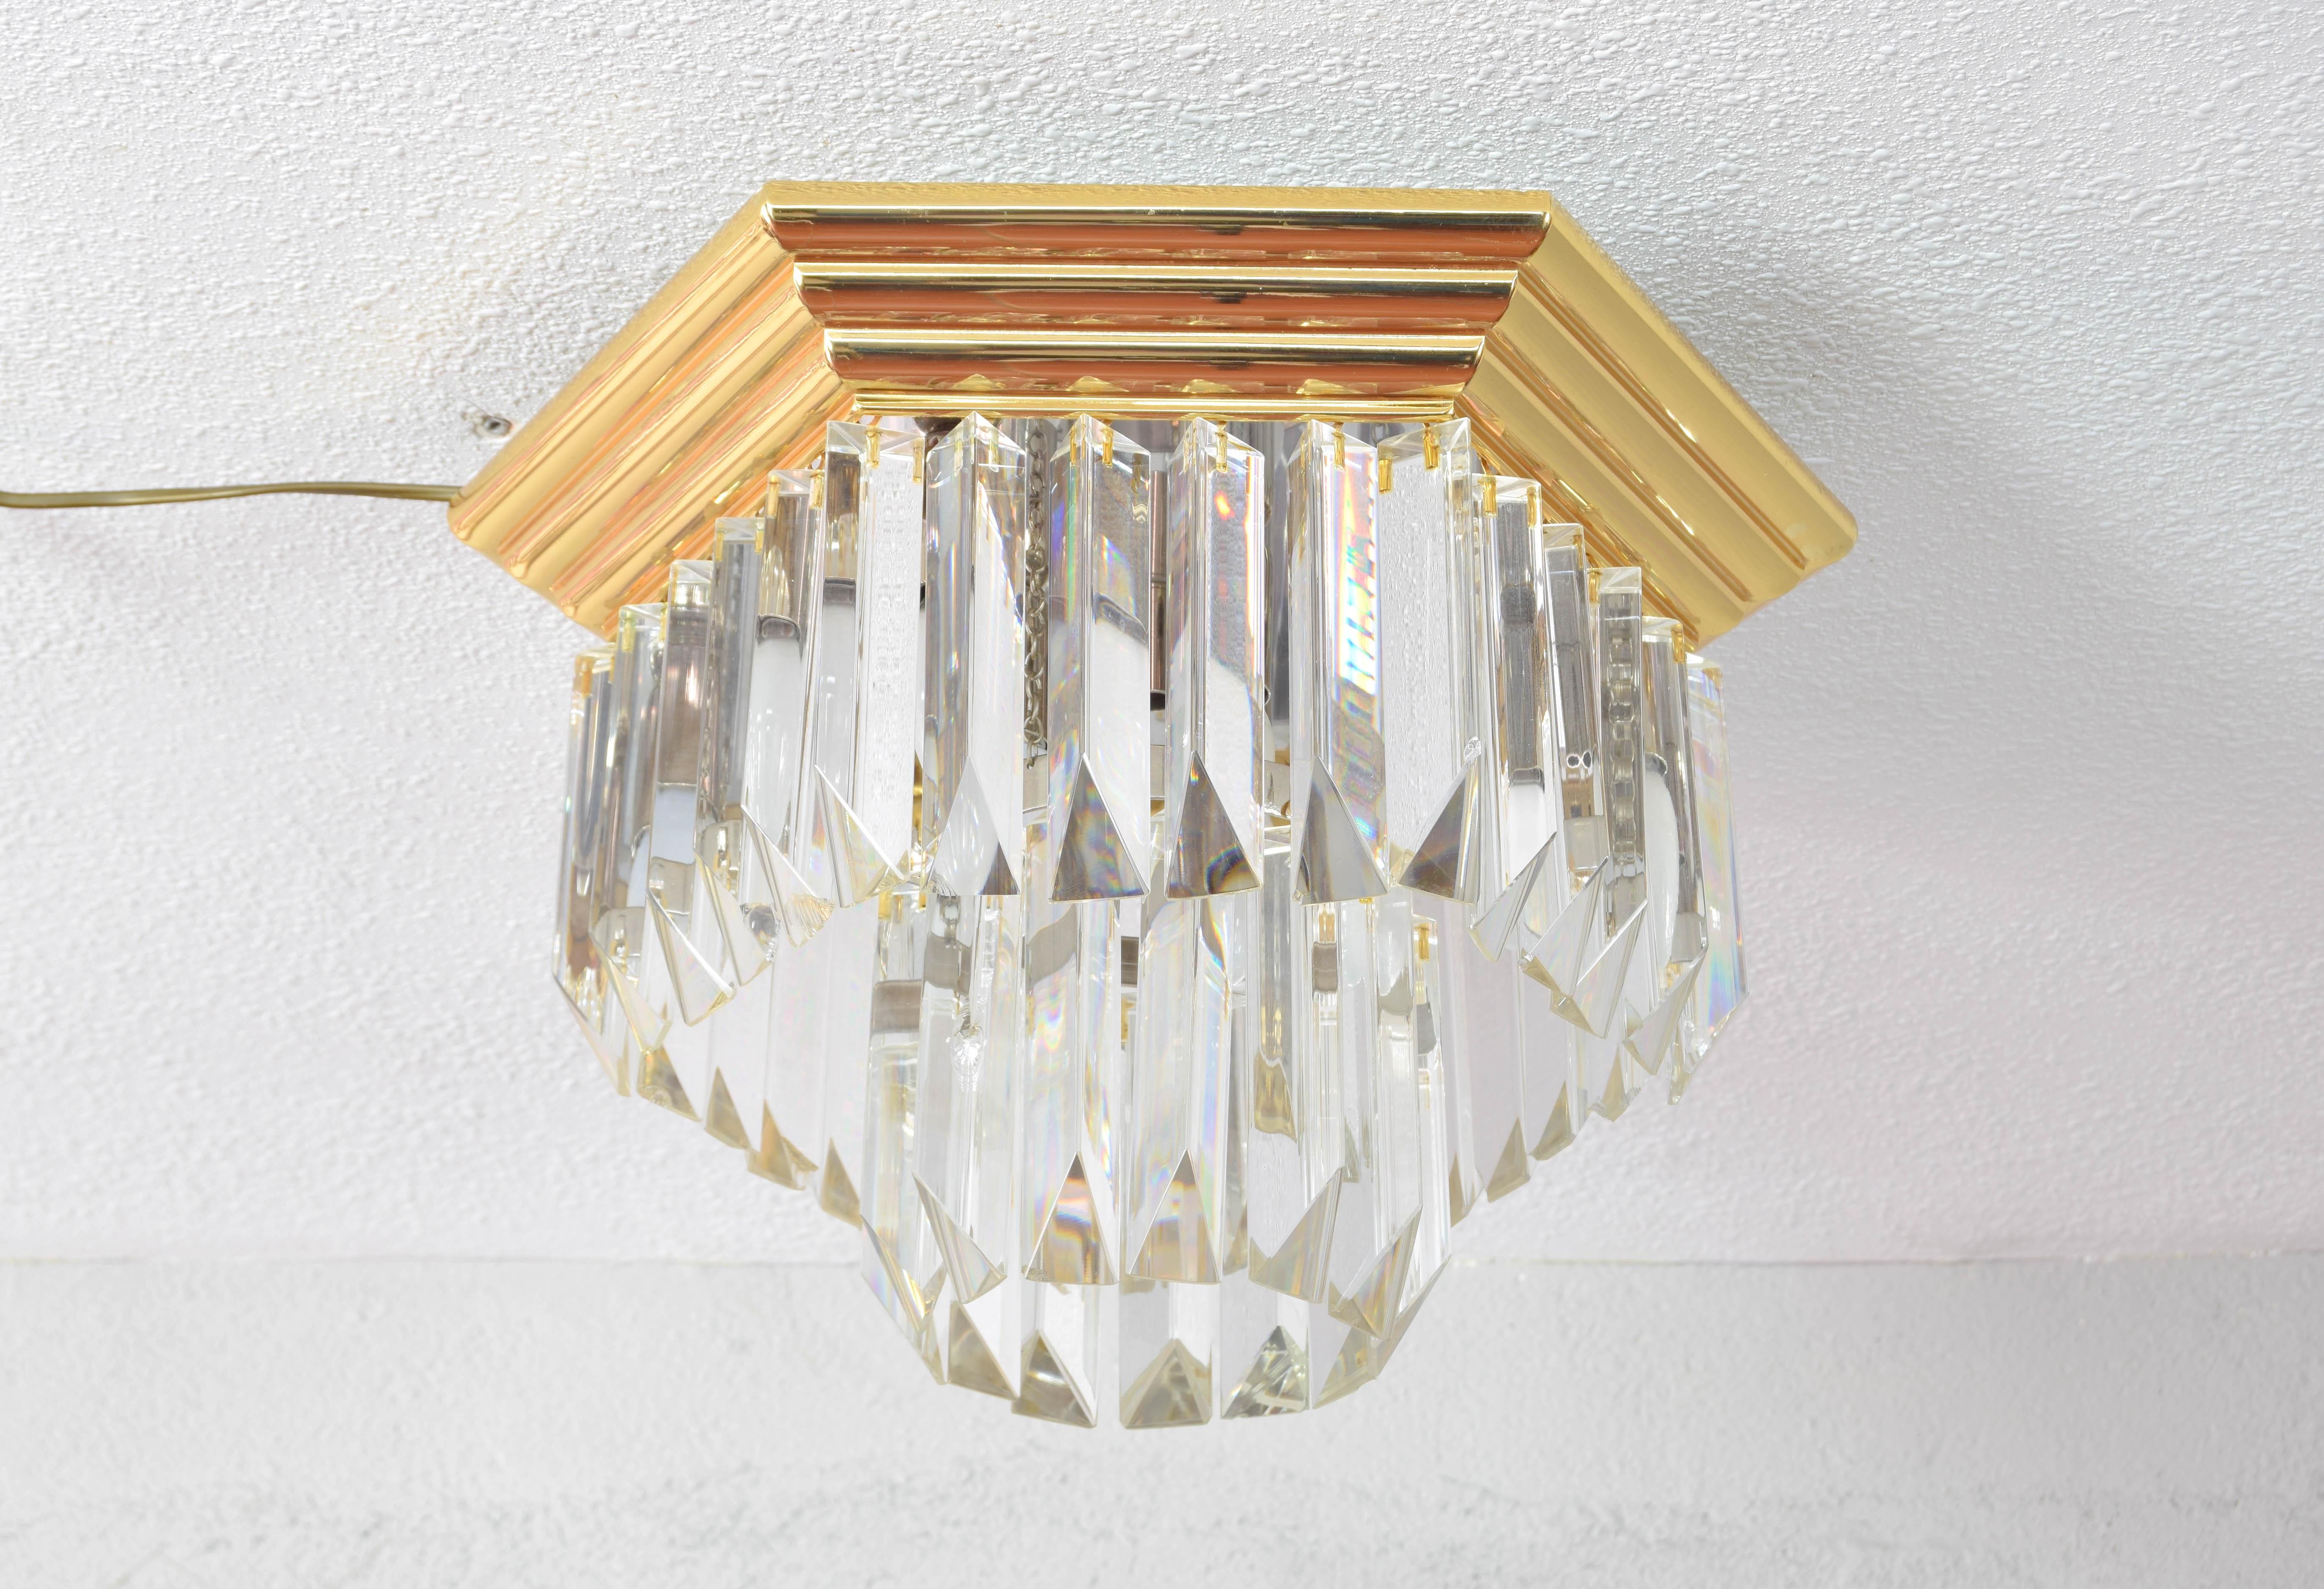 Magnificent Italian recessed lamp by Venini.
This hexagonal ceiling light consists of a brass and steel structure with two heights and six E14 bulbs.
Metal structure in very good condition.
Composed of 43 beautiful Triedri crystals.
It has defects